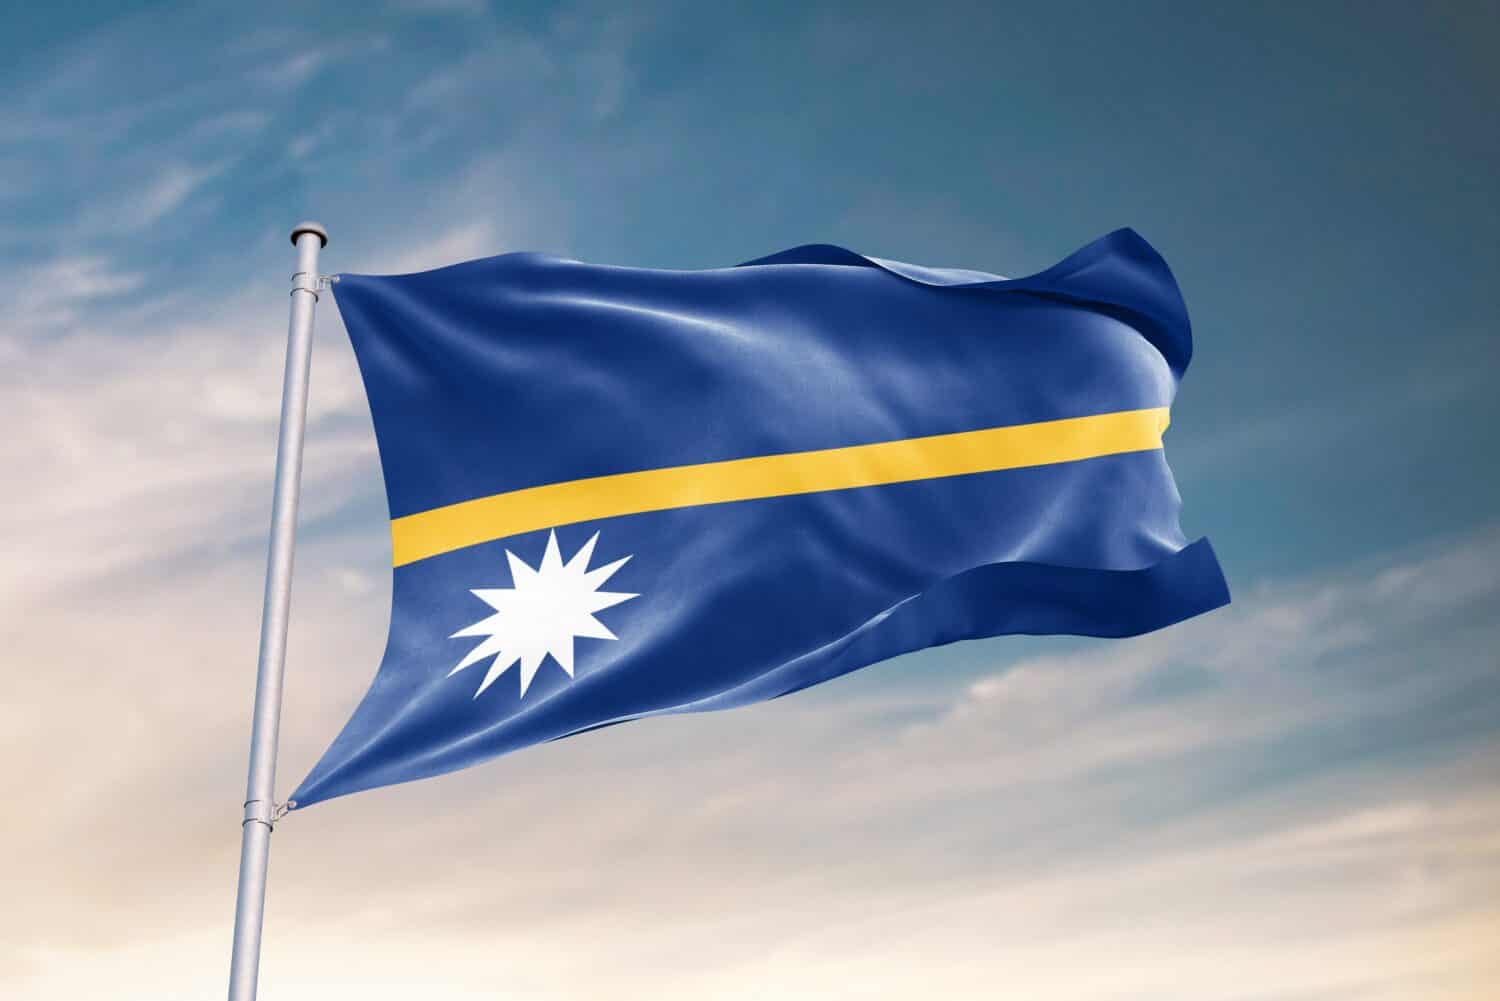 Waving flag of Nauru in beautiful sky. Nauru flag for independence day. The symbol of the state on wavy fabric.